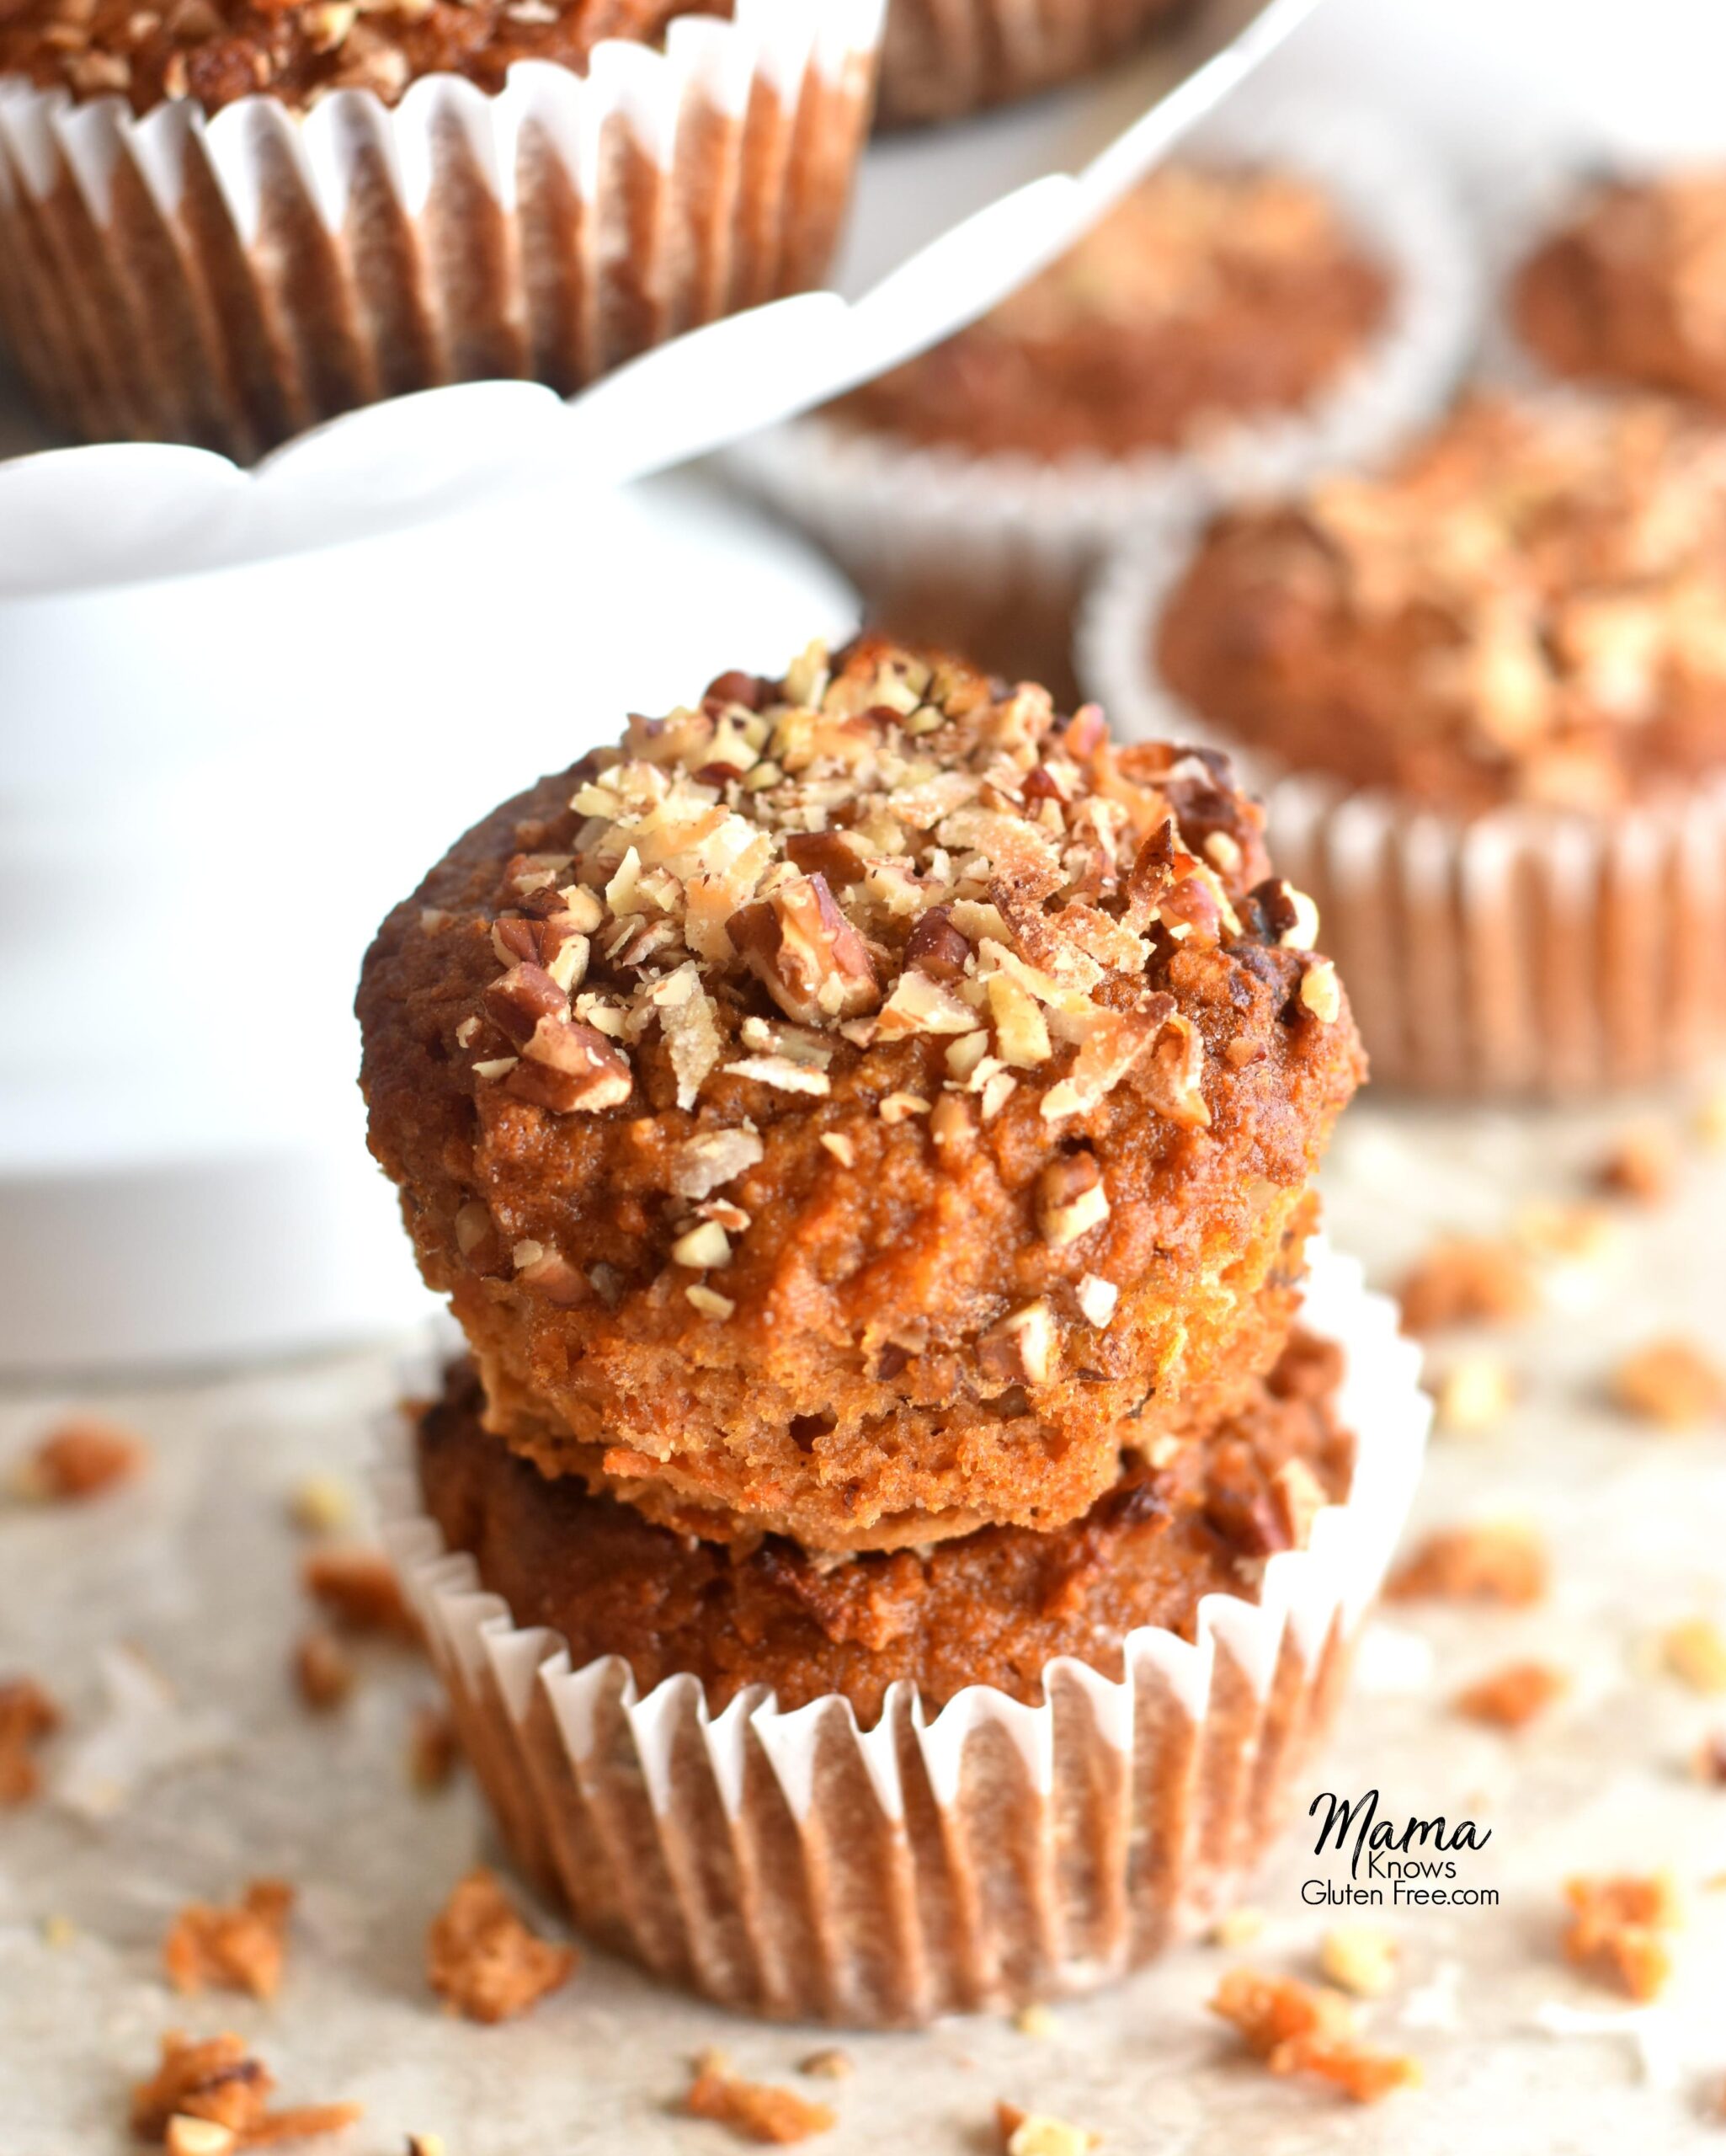  Finally, a muffin that meets different dietary restrictions and still has fantastic flavor!